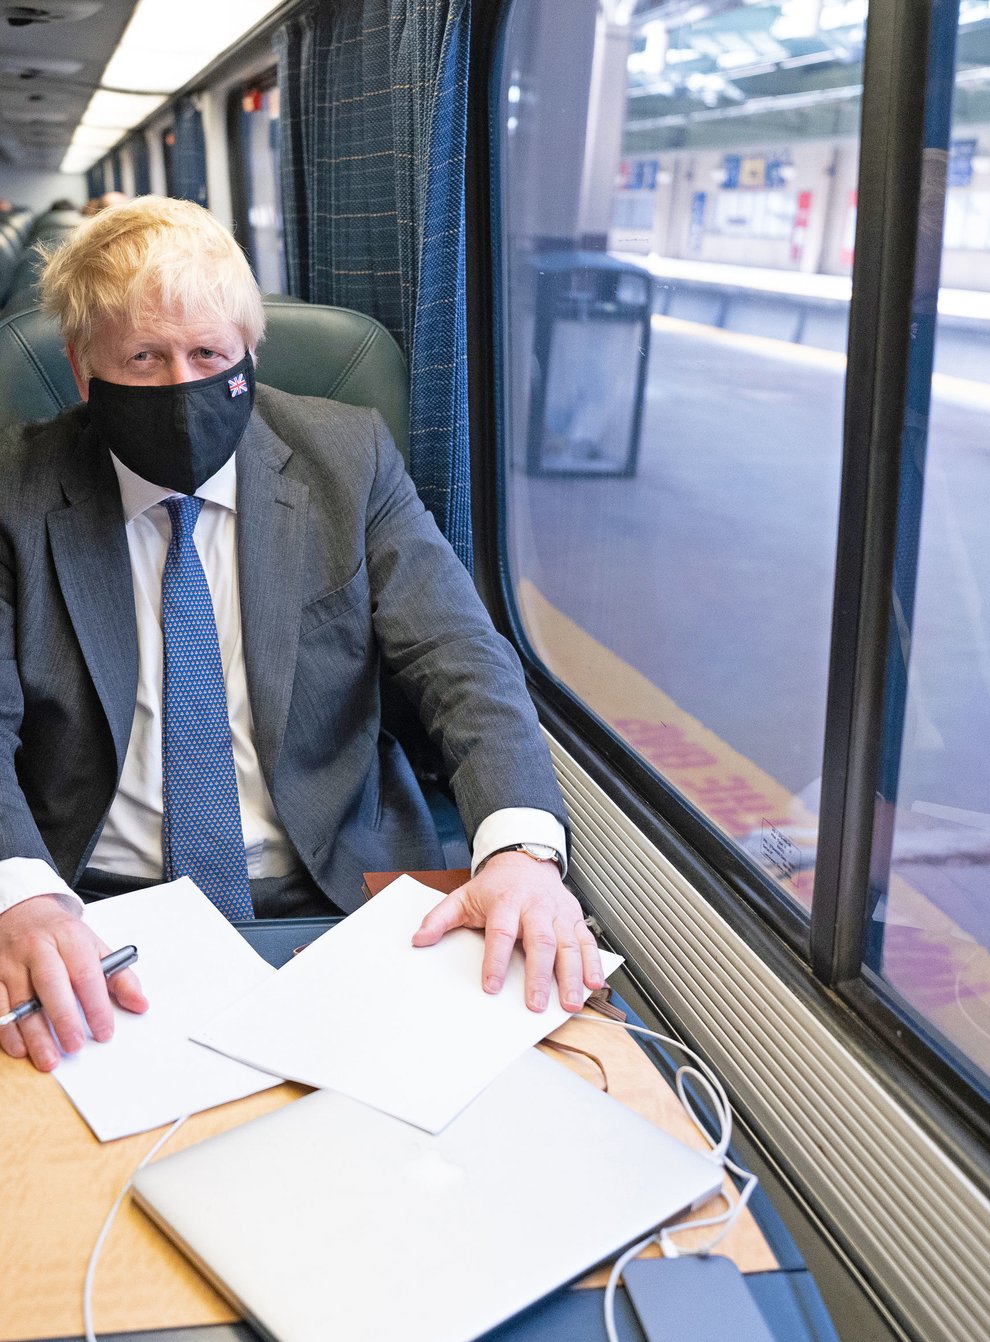 Prime Minister Boris Johnson spoke to reporters about Universal Credit while travelling on a train in the US (Stefan Rousseau/PA)